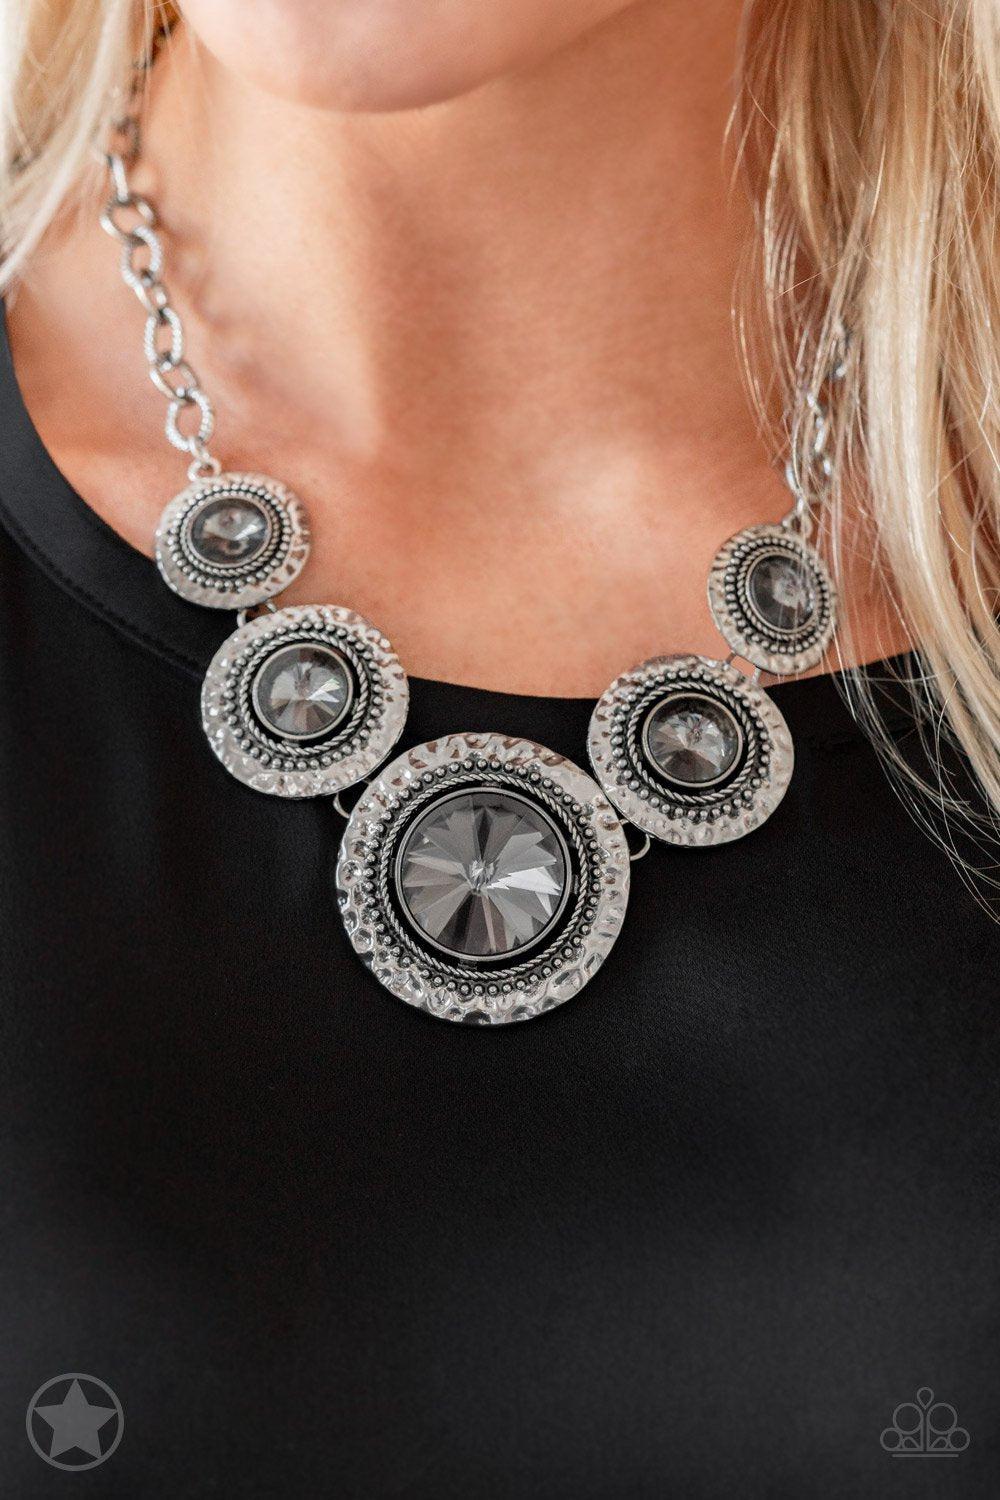 Global Glamour Silver and Smoky Gem Necklace and matching Earrings - Paparazzi Accessories - model -CarasShop.com - $5 Jewelry by Cara Jewels